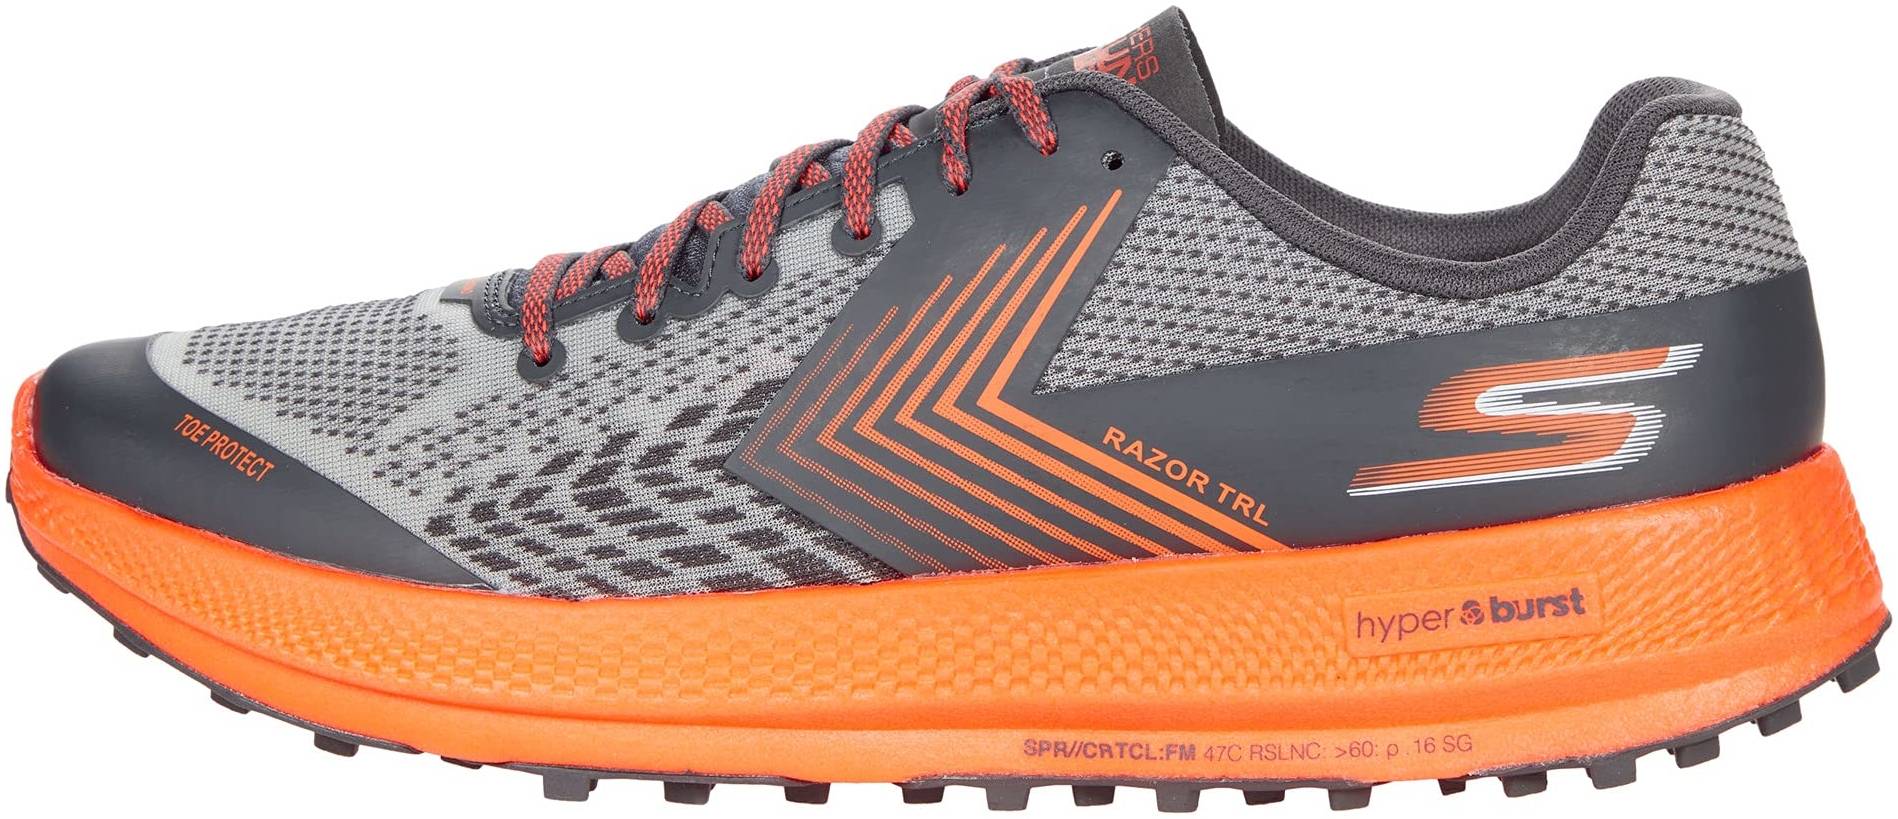 Partido Portal Pólvora Skechers trail running shoes: Save up to 51% | RunRepeat